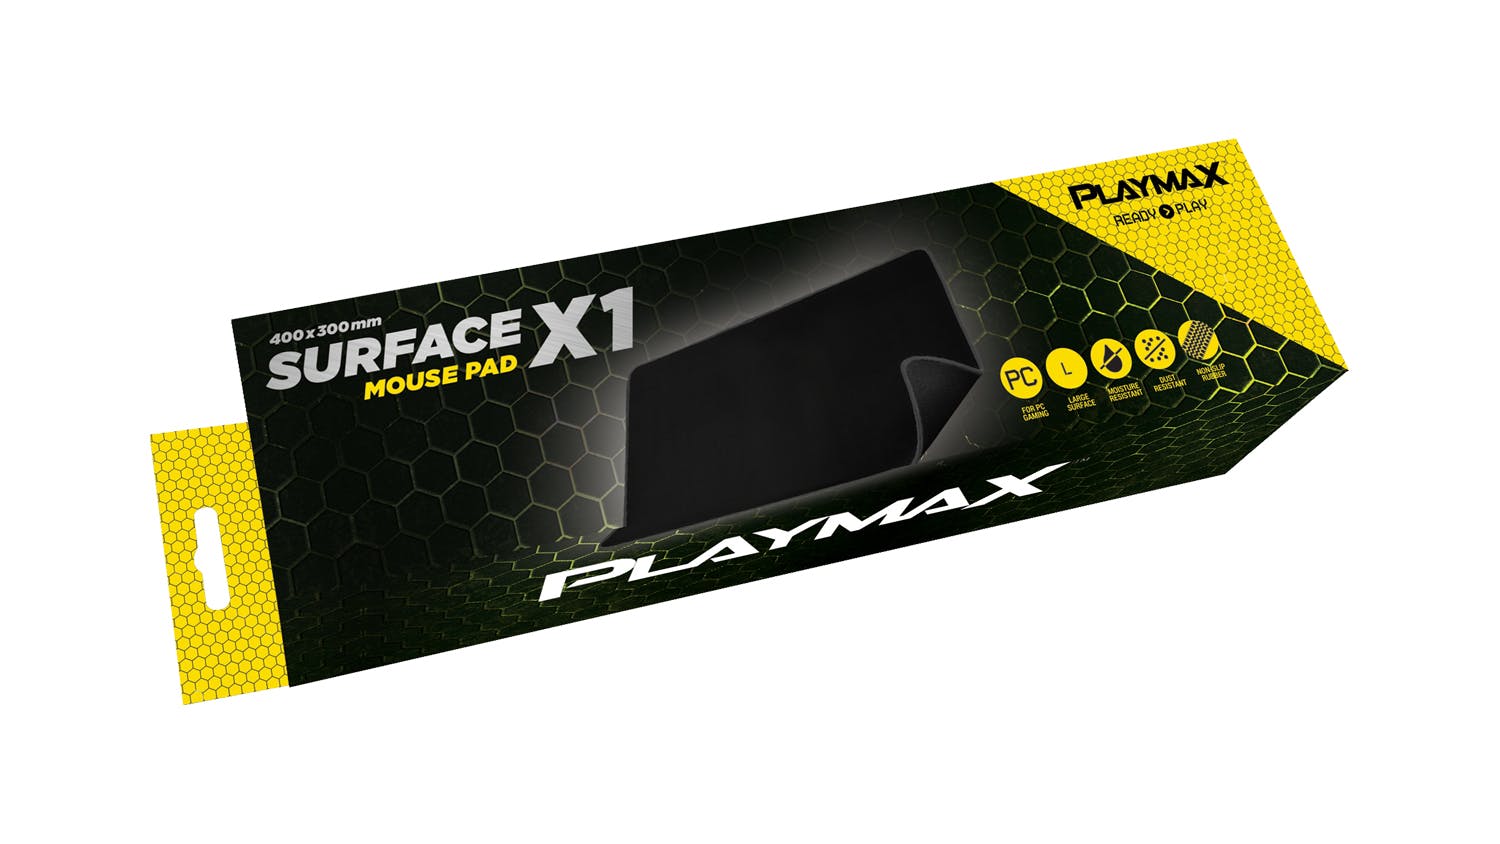 Playmax Surface X1 Mouse Mat - PC